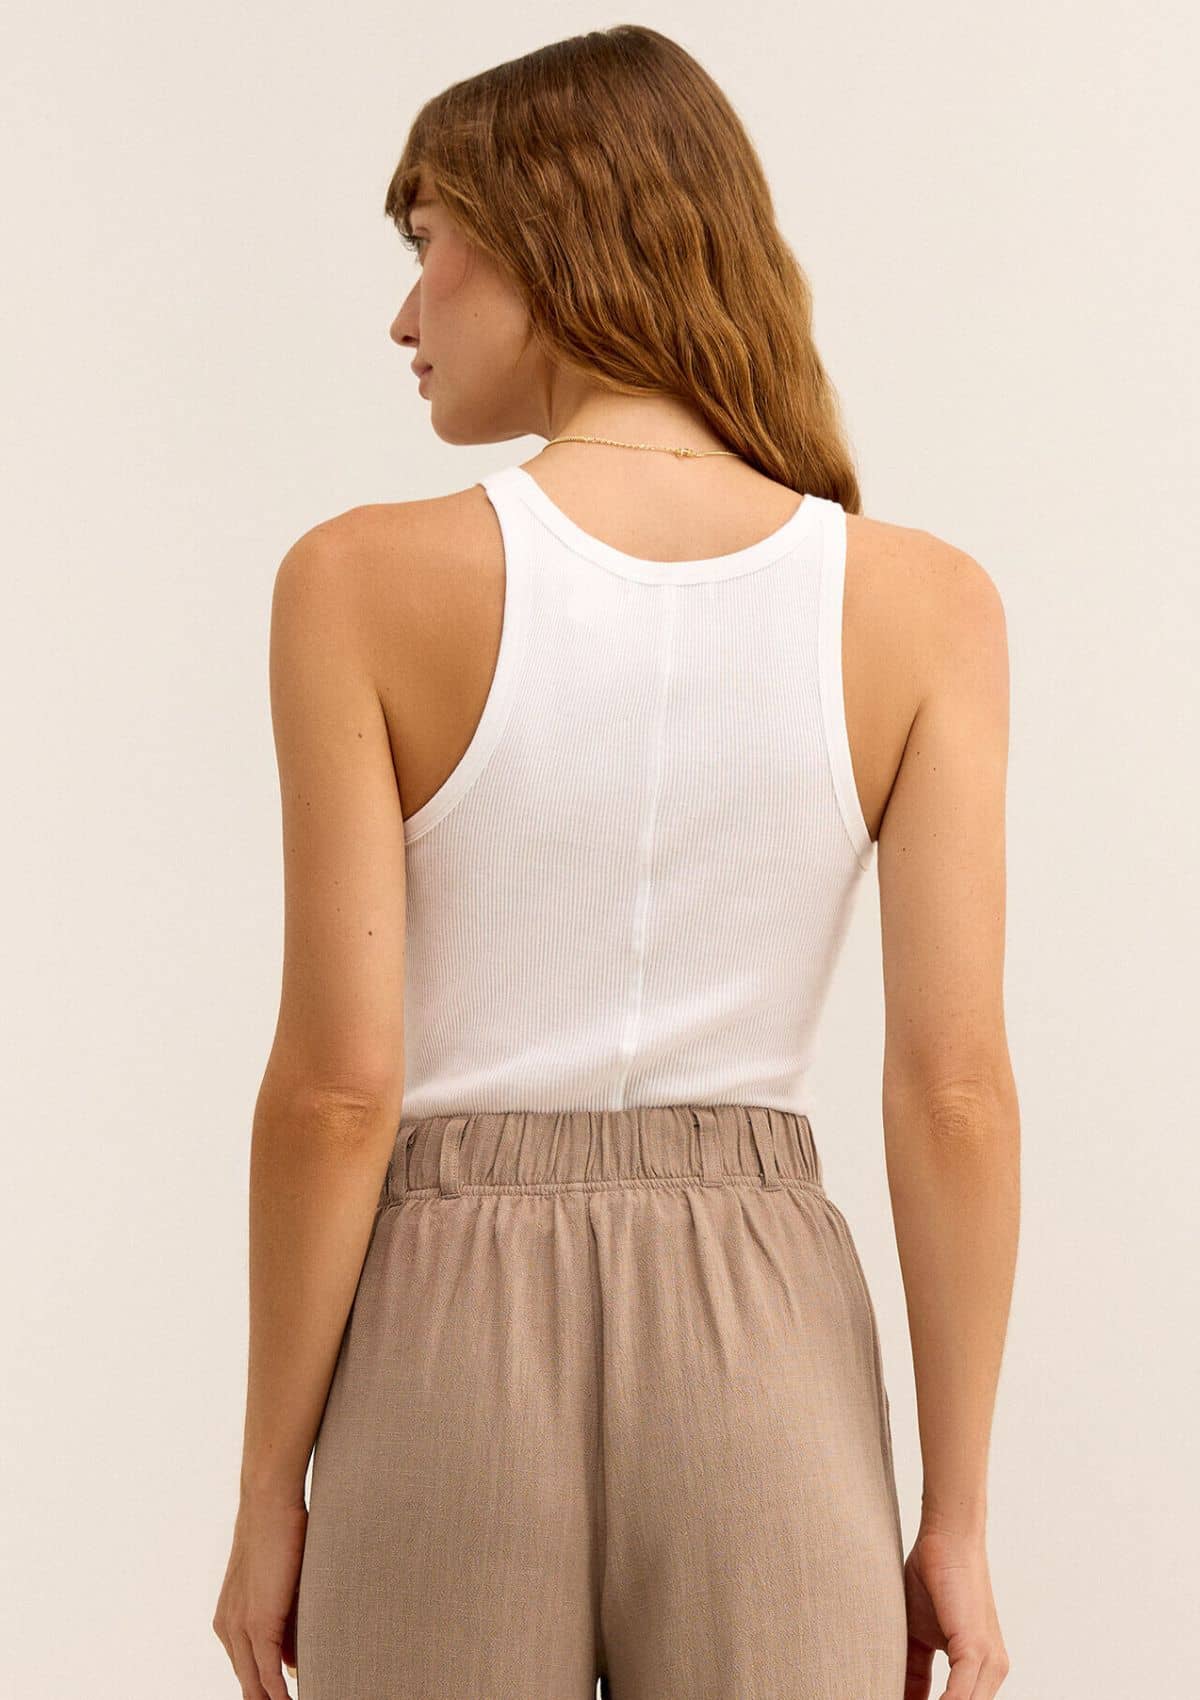 Middle seam on back. Tucked in high rise tan slacks.